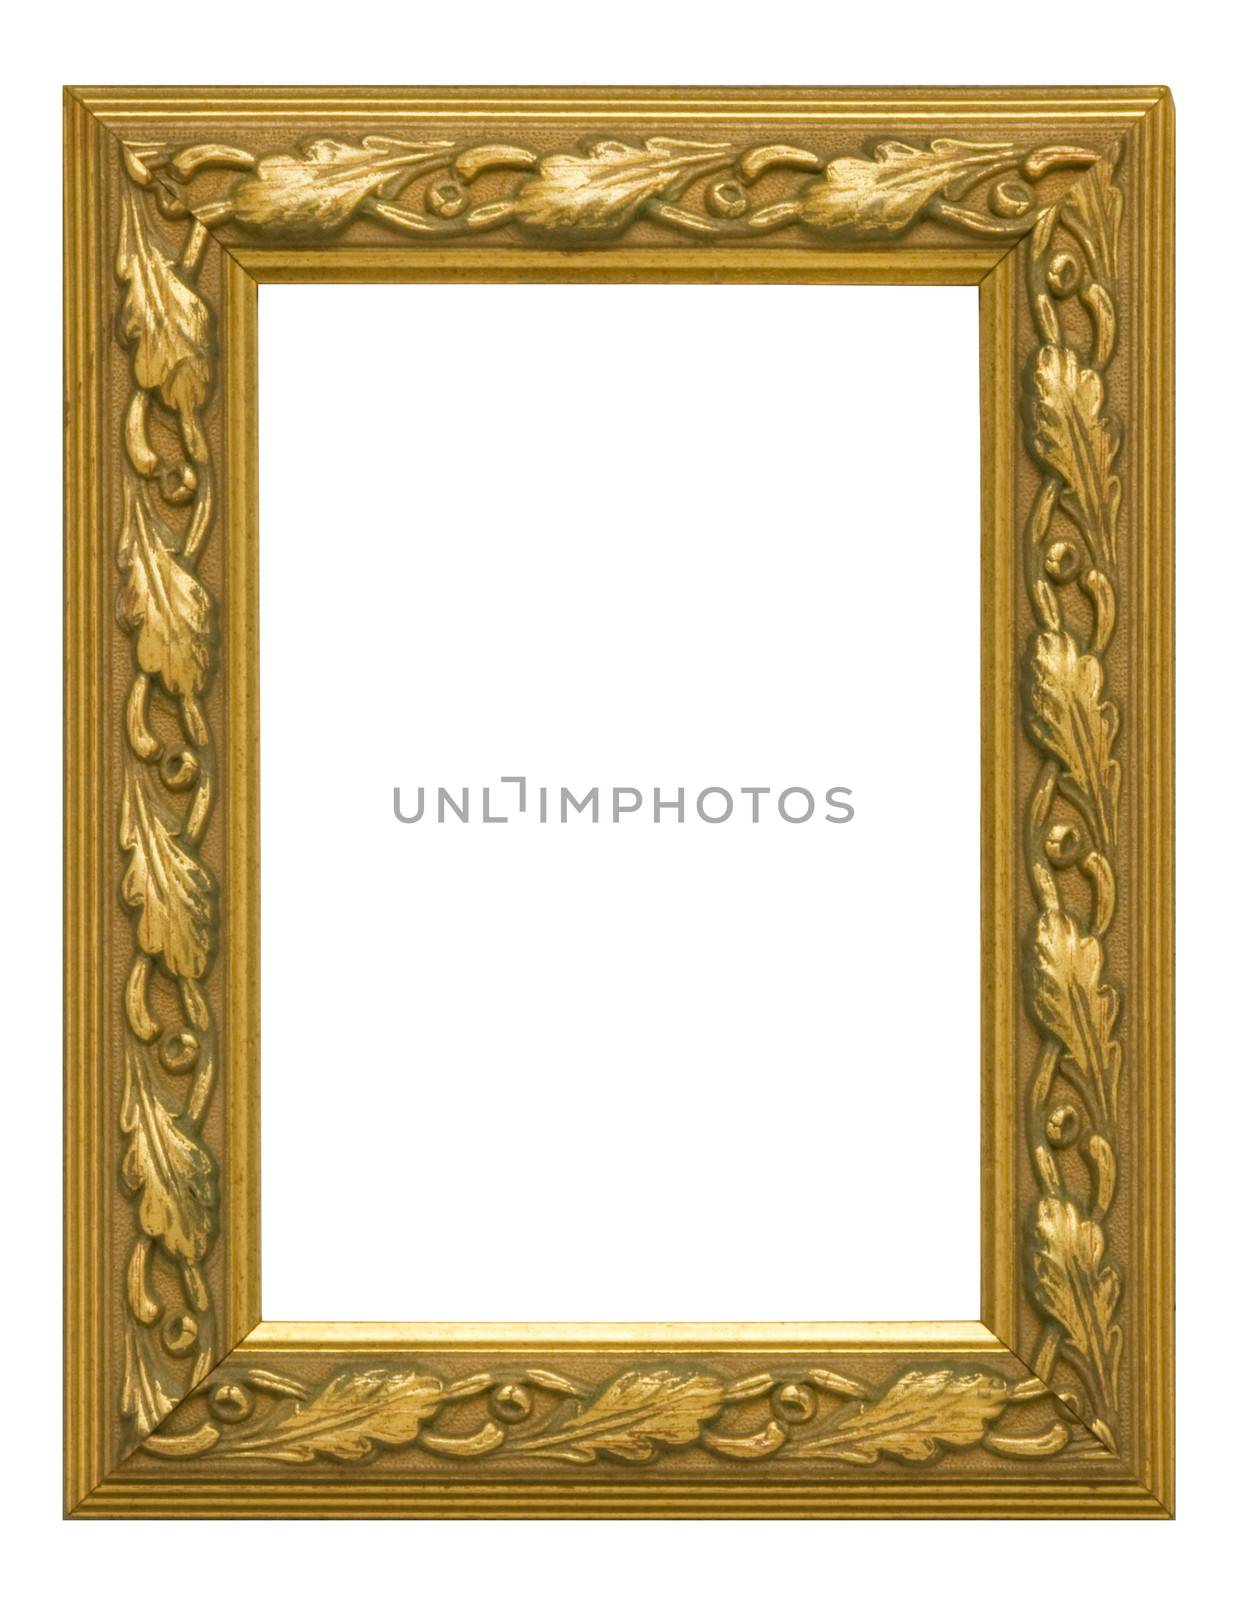 Antique gold vertical picture frame against white background